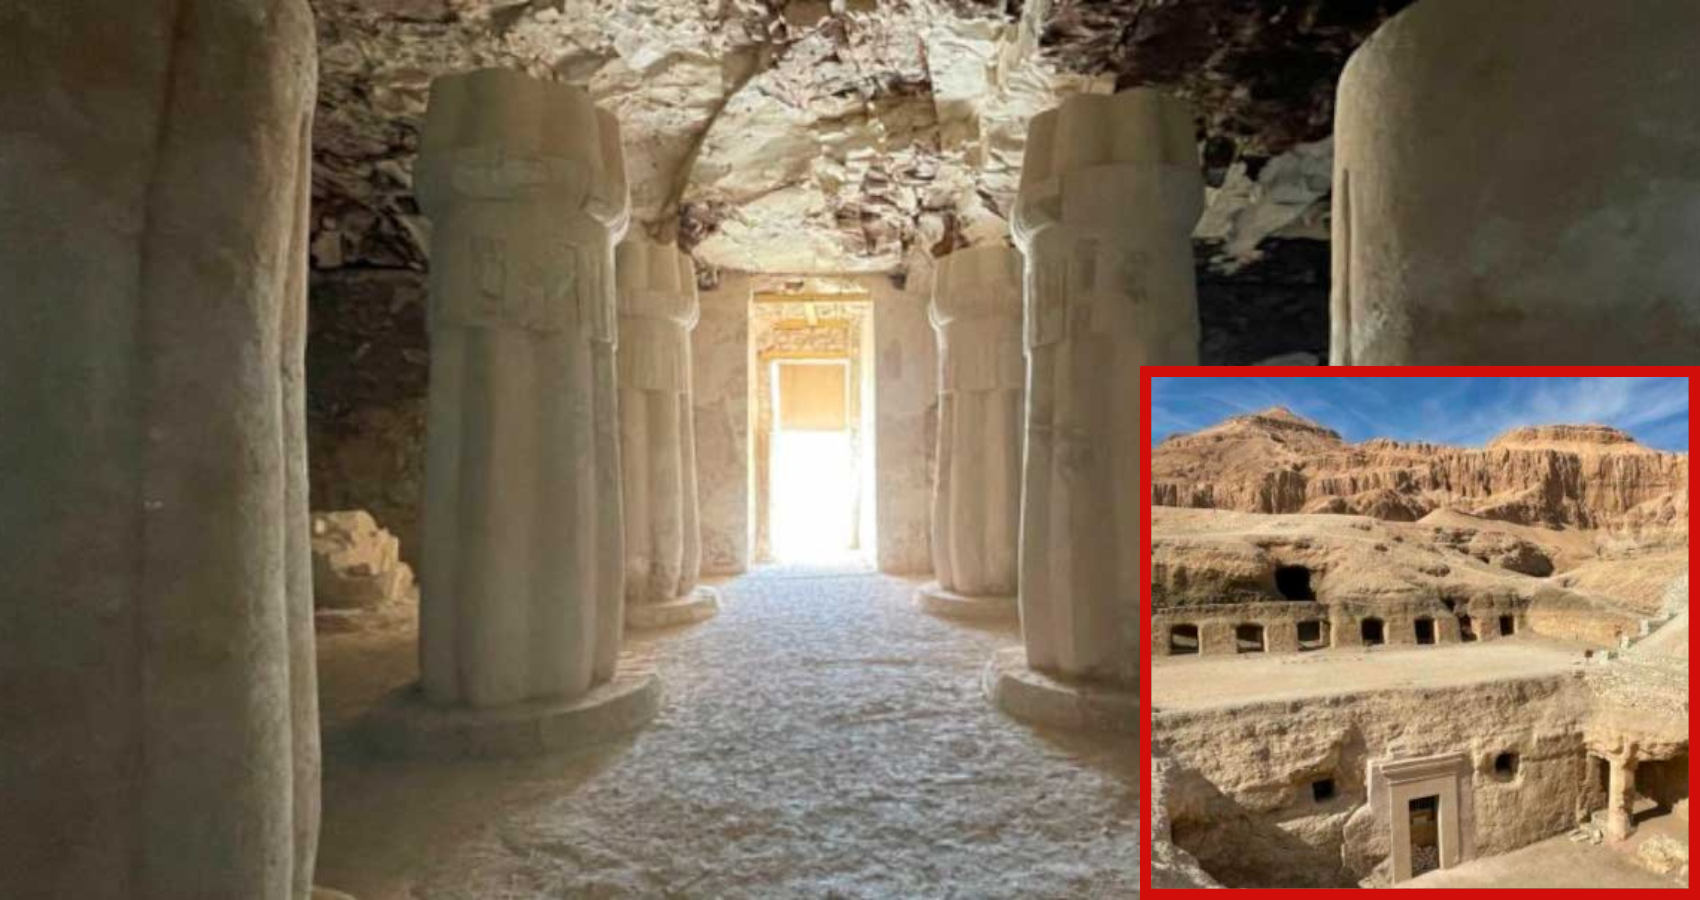 Egyptian Tombs Reveal 60 High-Ranking Burials from the 18th Dynasty